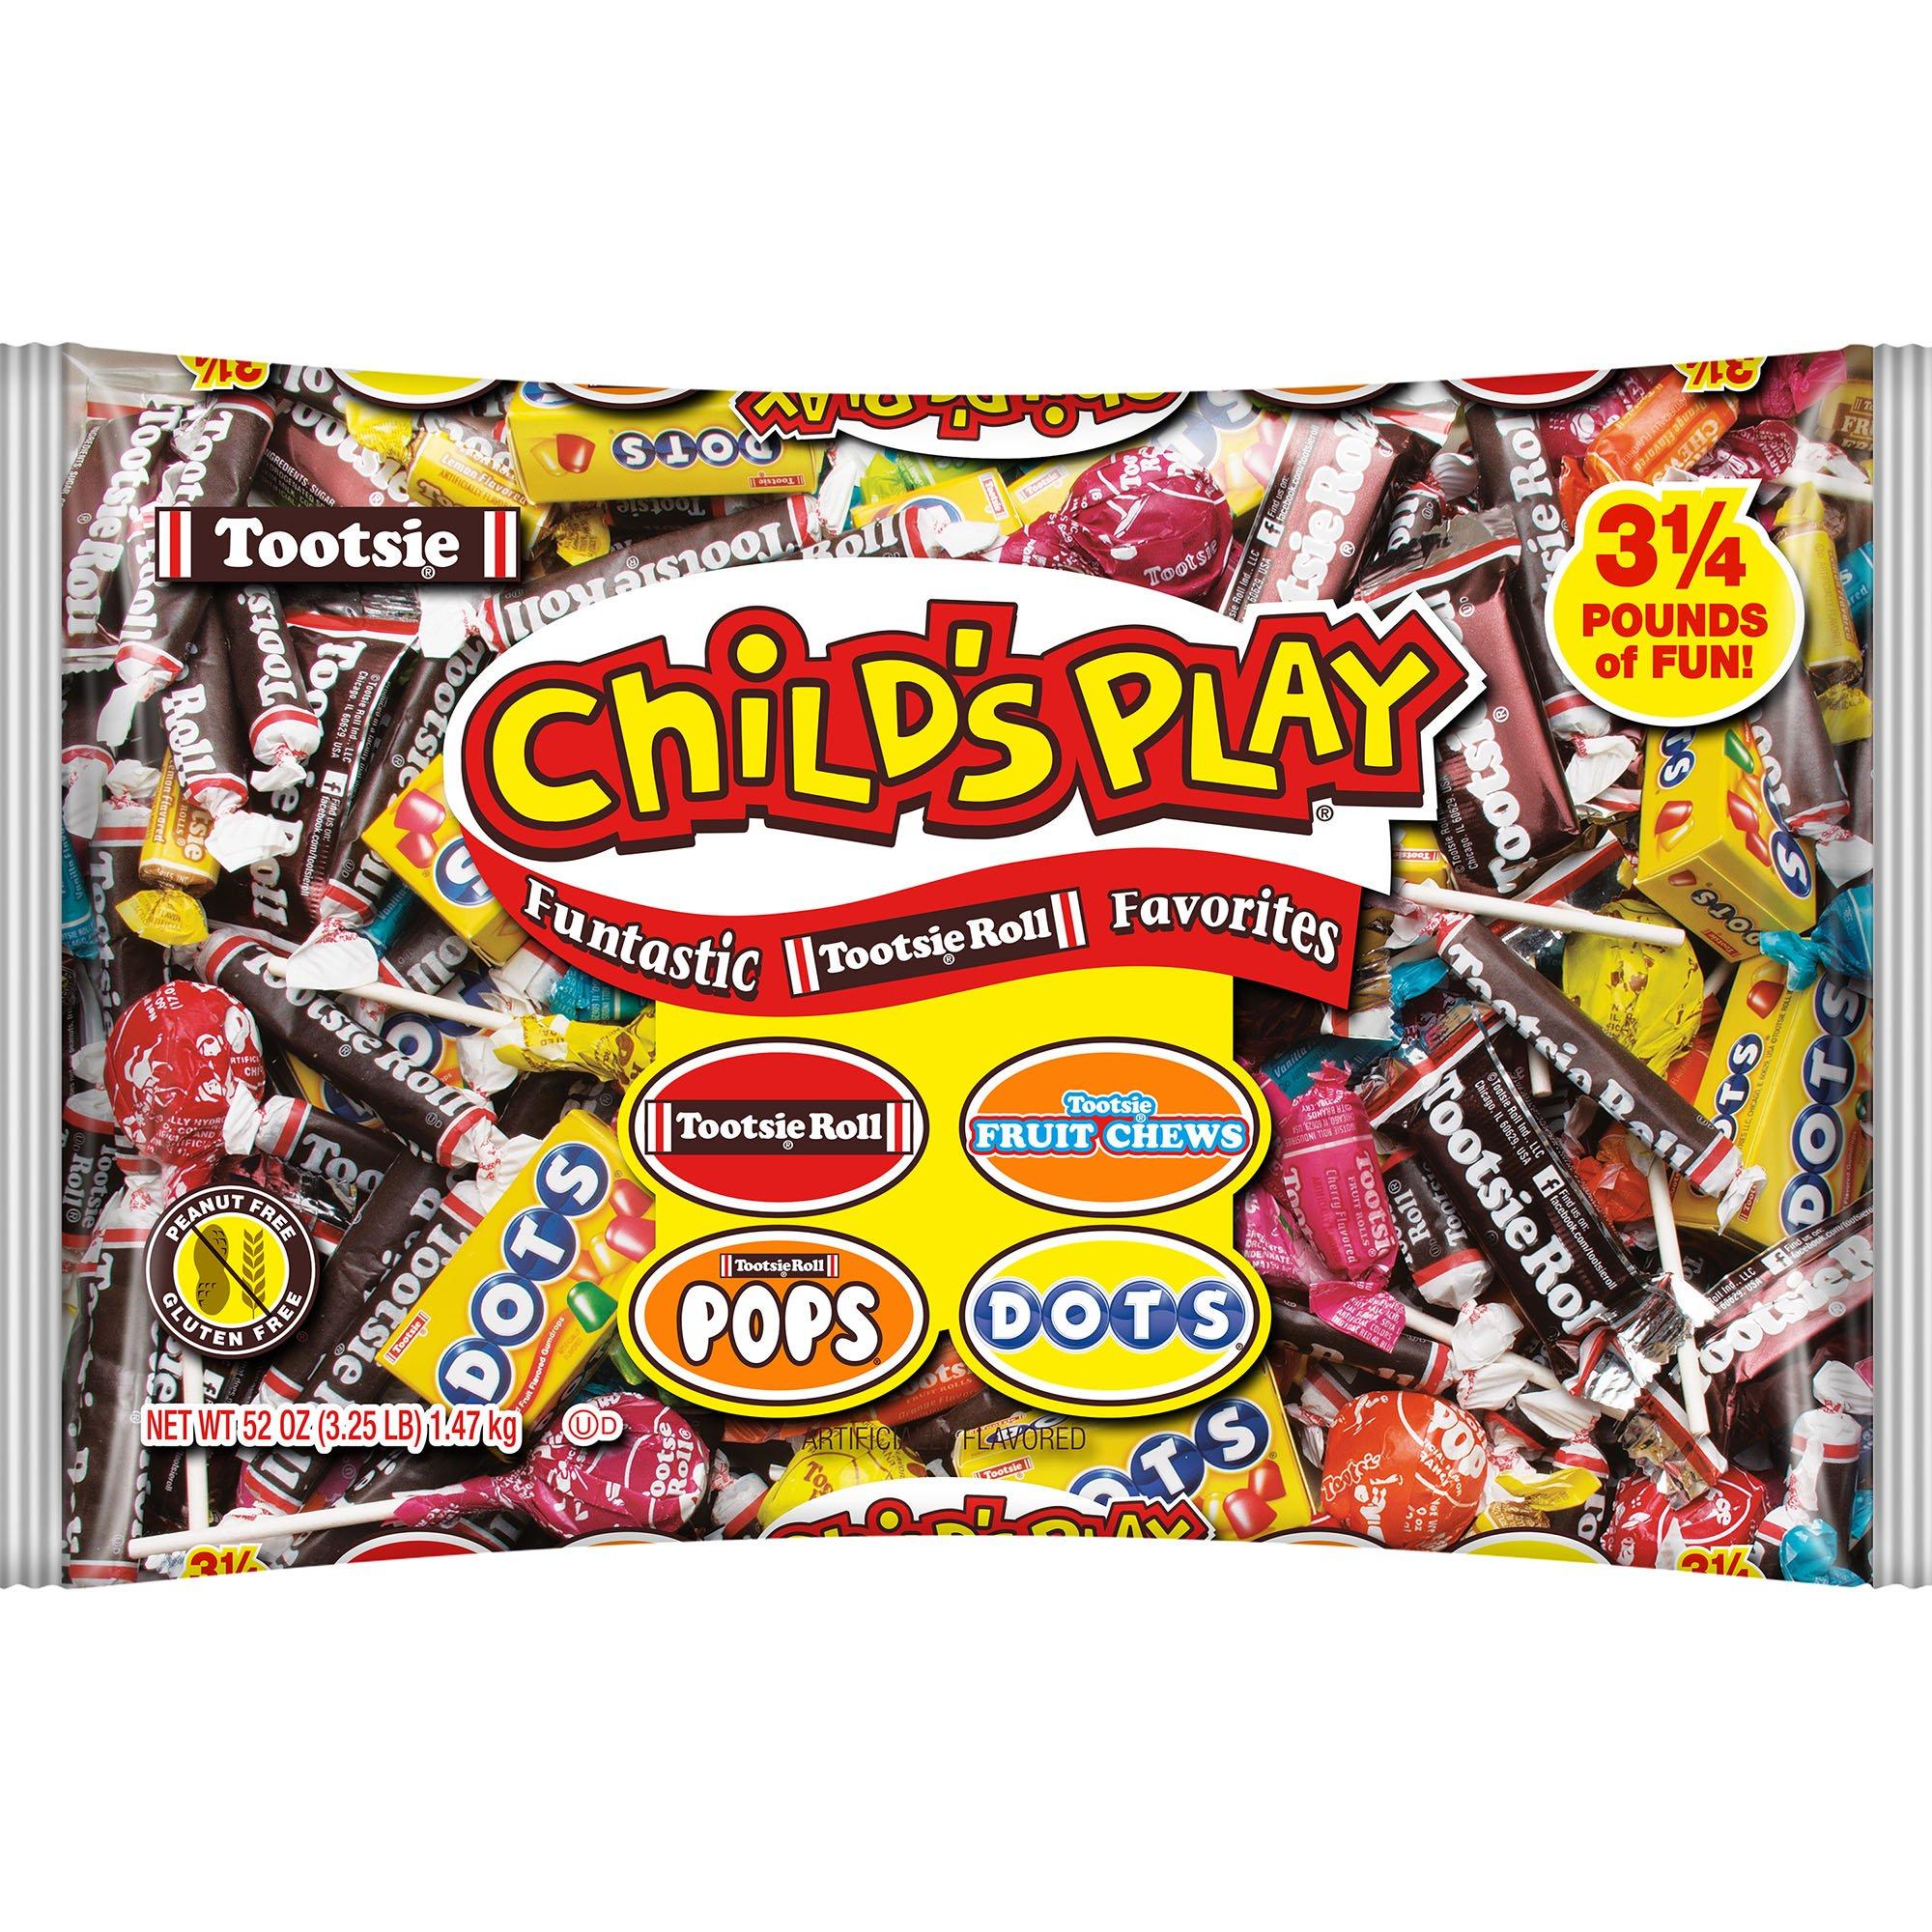 Sour Candy Variety Pack - 2 Pounds - Bulk Candy - Individually Wrapped  Candy - Assorted Pinata Candy - Candy For Goodie Bags - Party Favors For  Kids